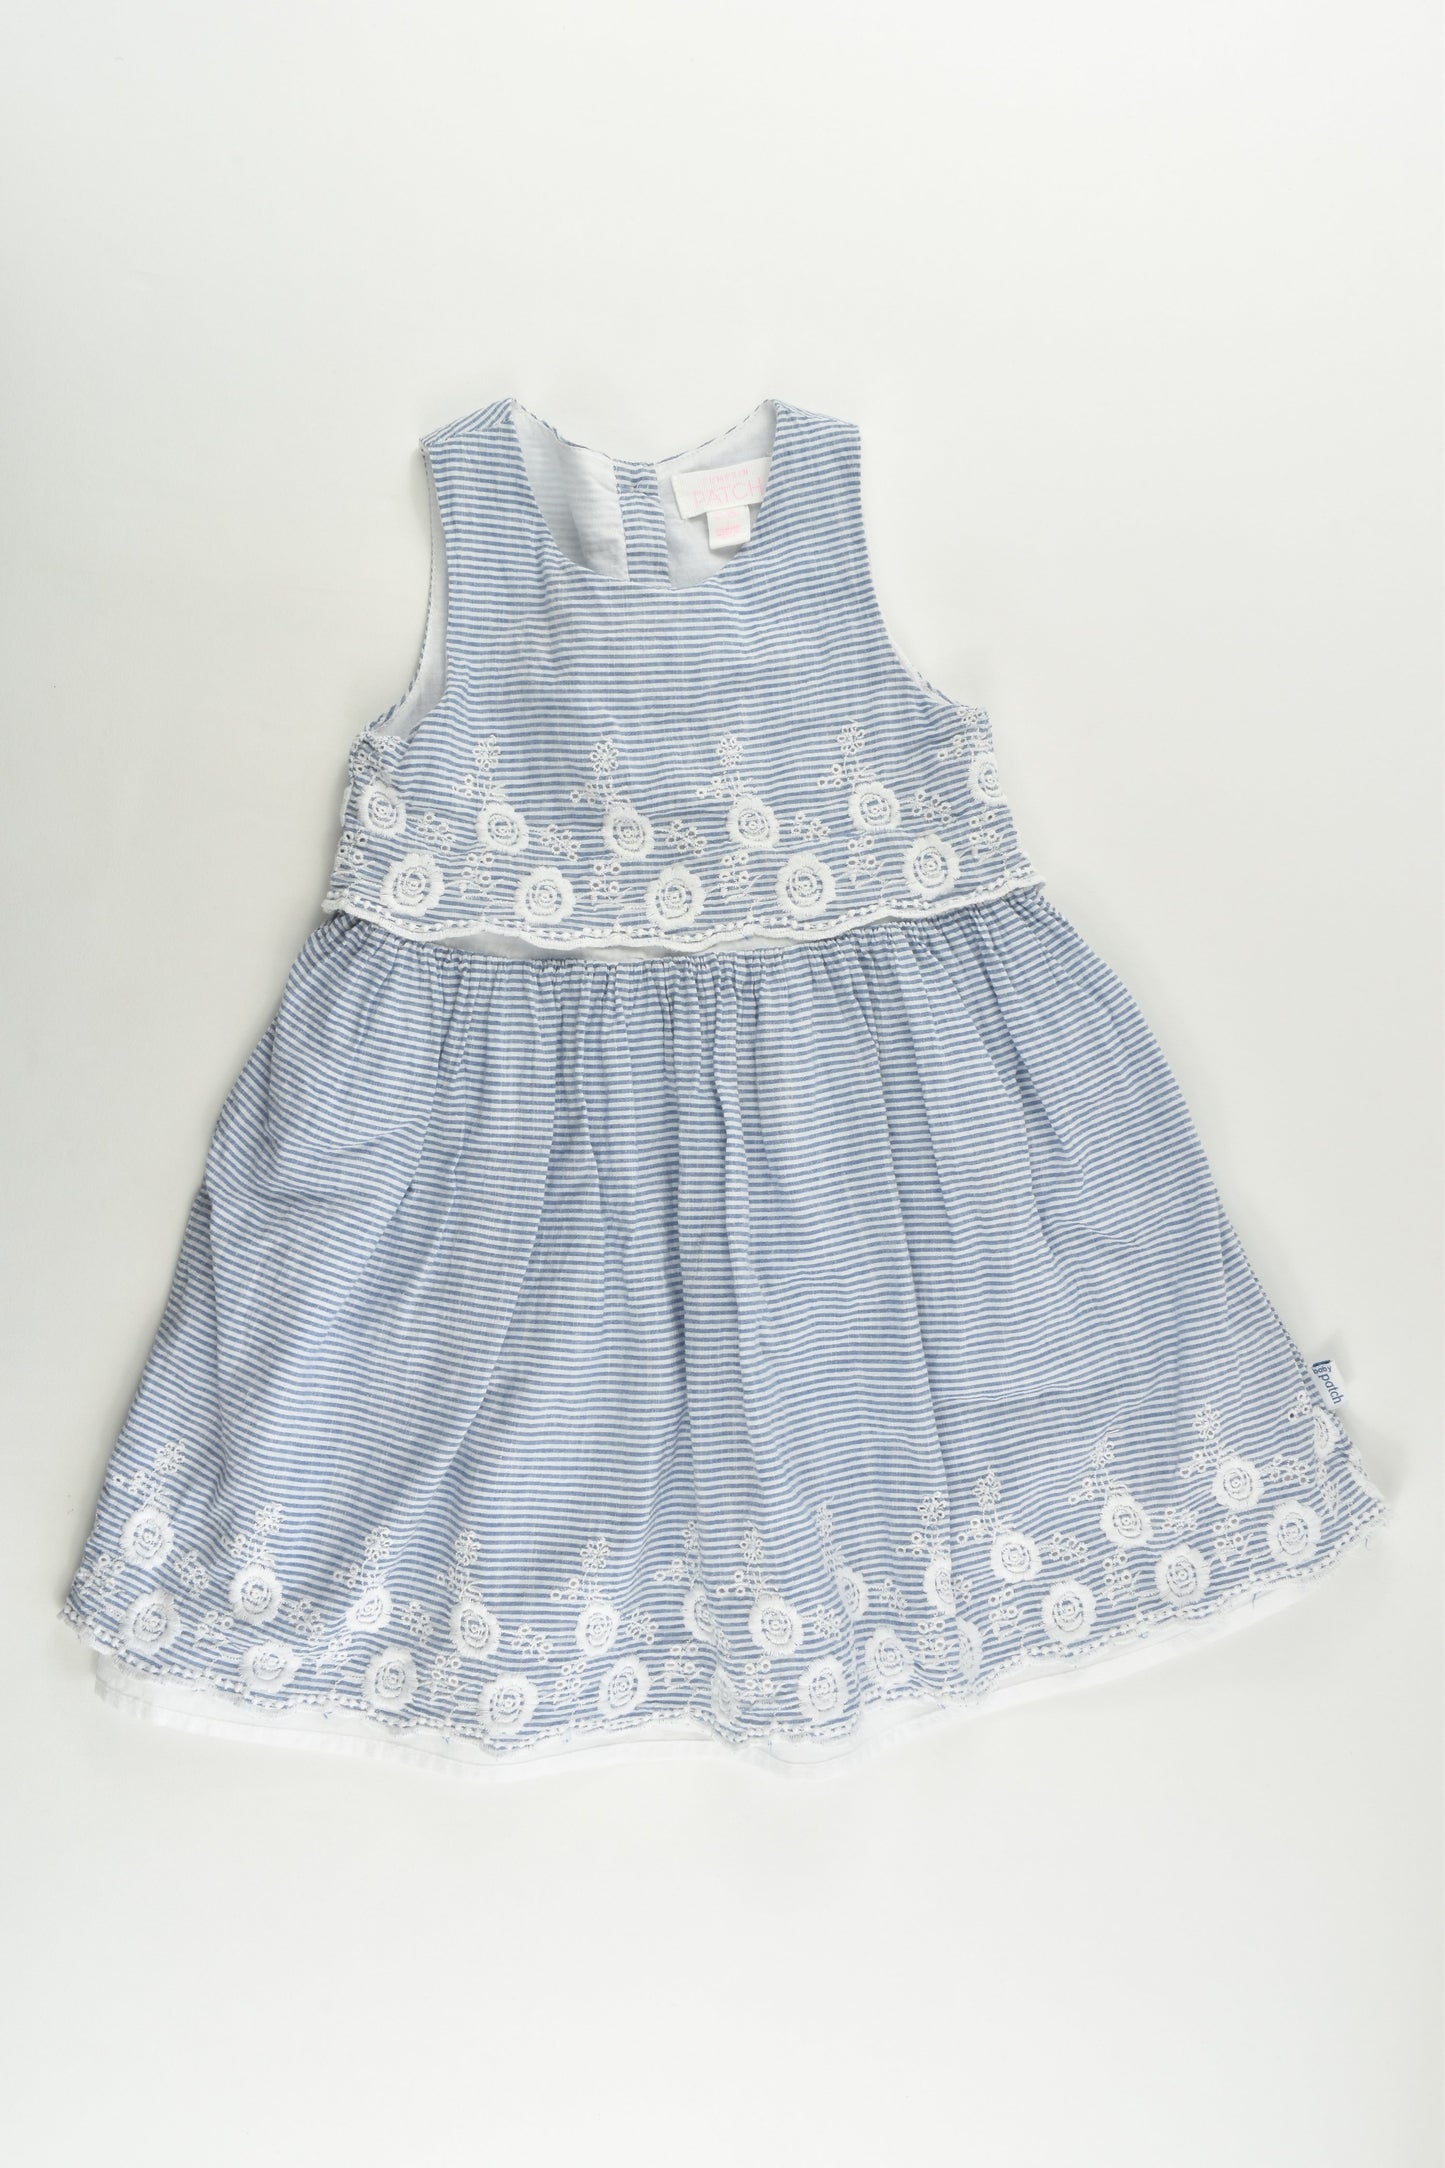 Pumpkin Patch Size 1 (12-18 months) Lined Dress with Lace Details